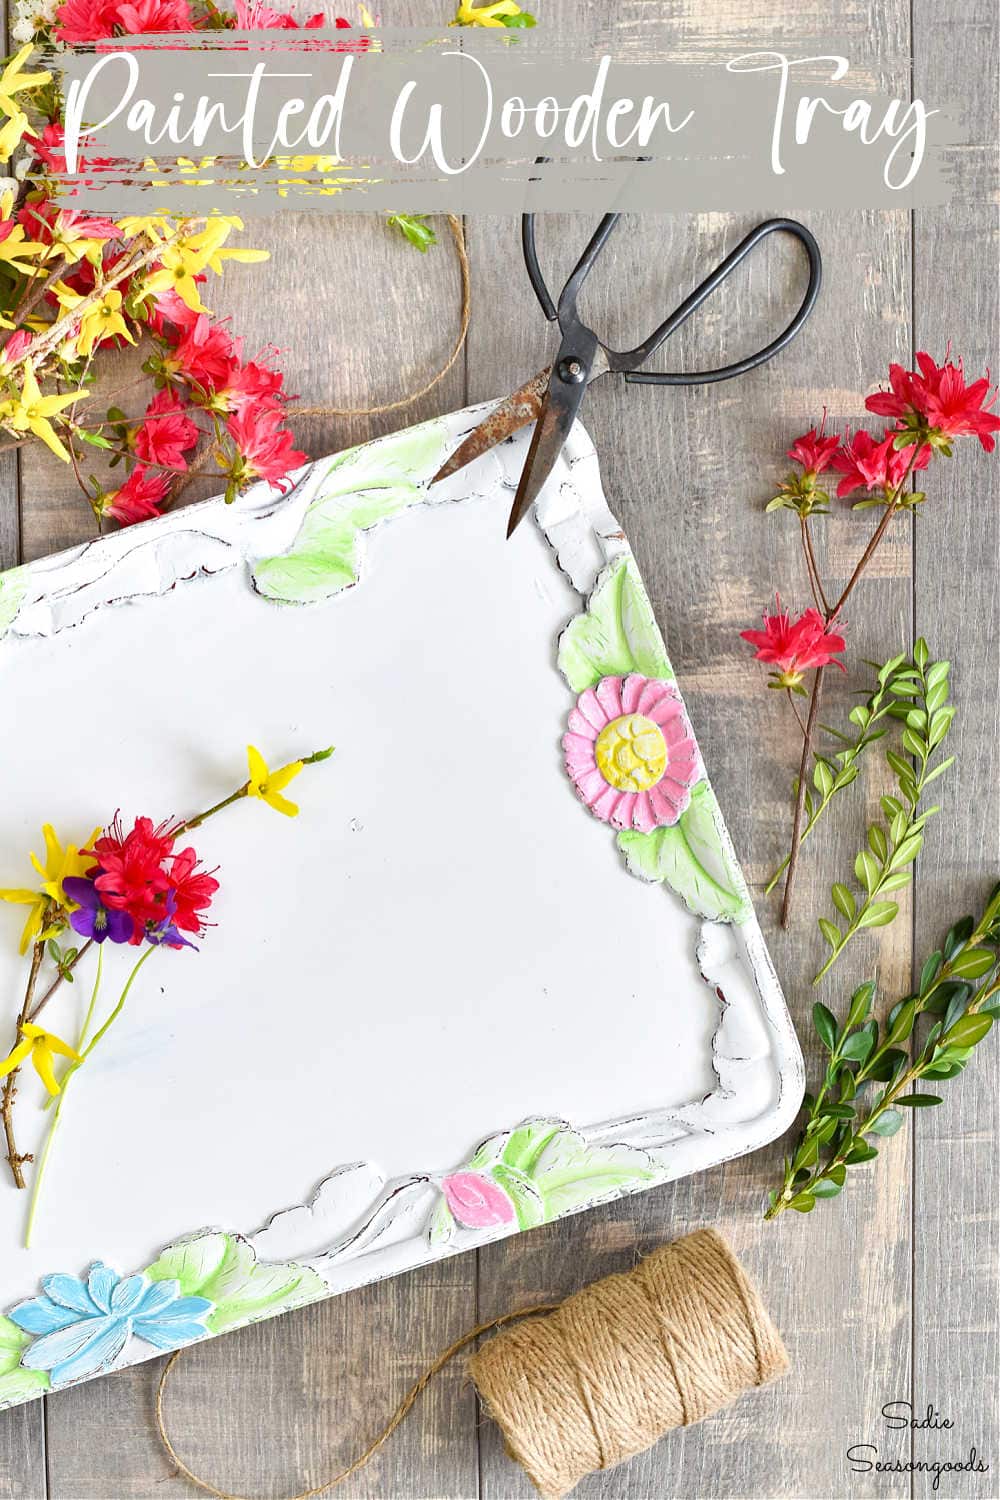 spring decor with a painted tray